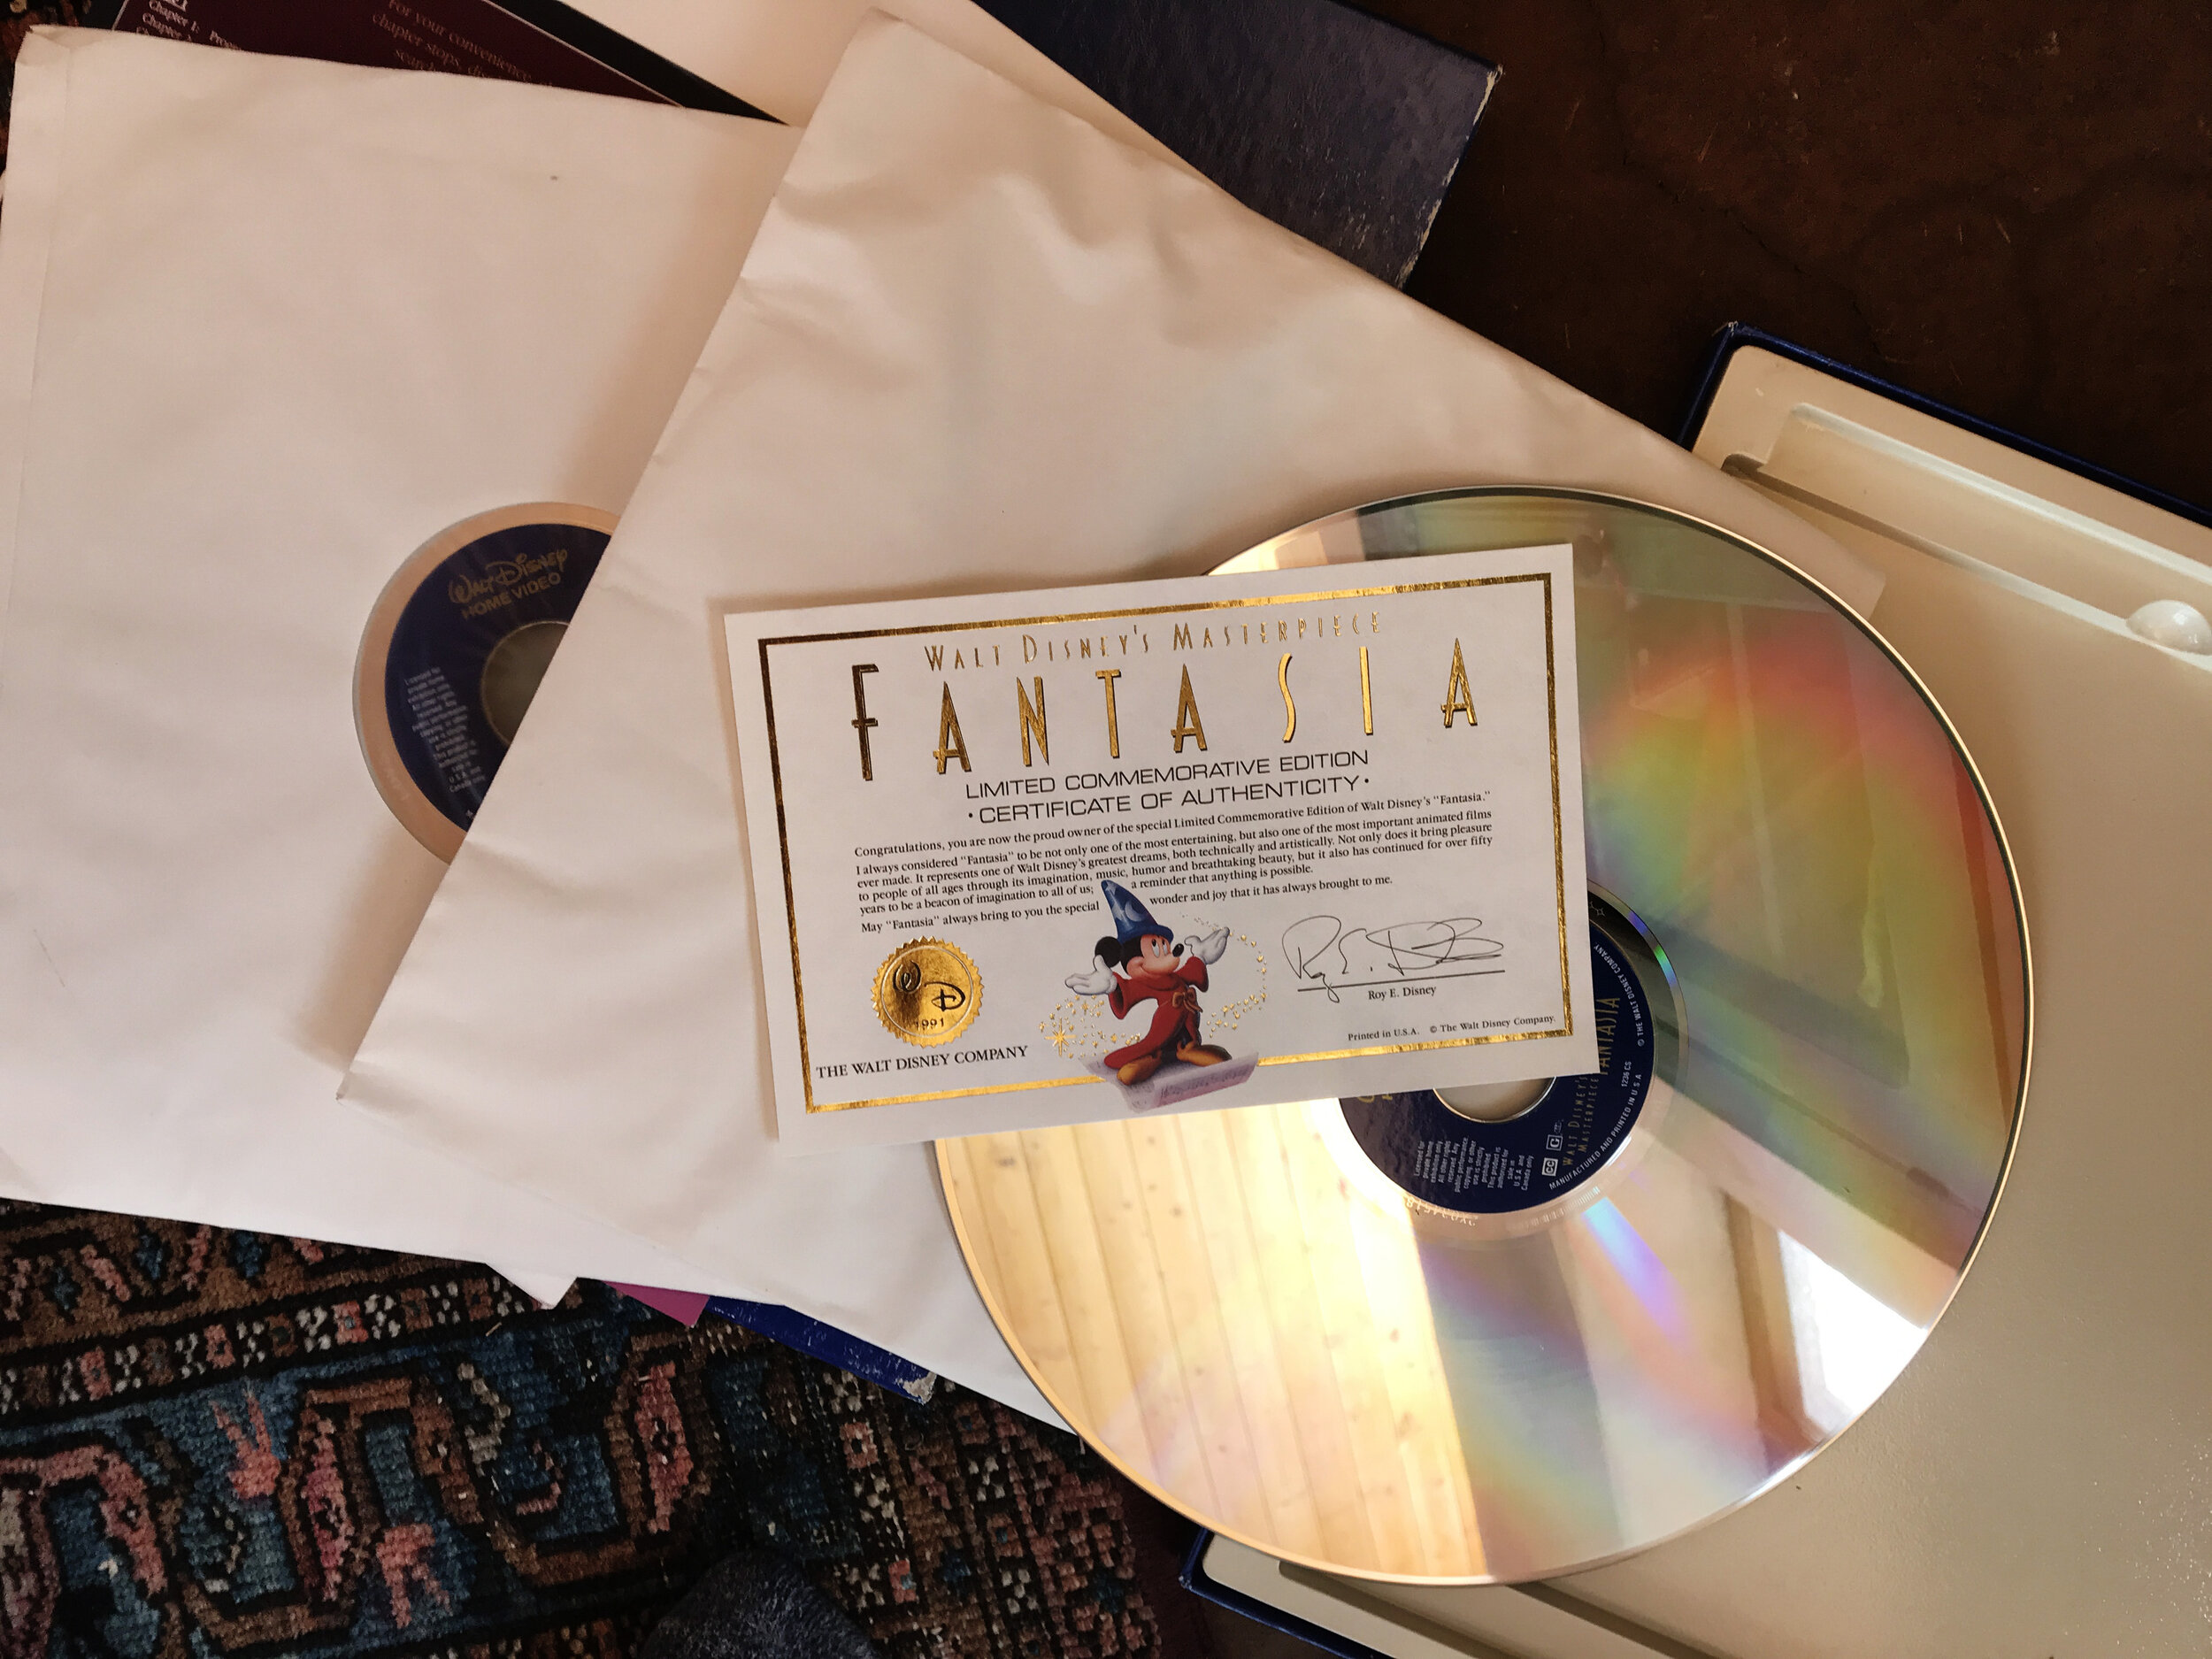 The Fantasia Deluxe Boxed Set